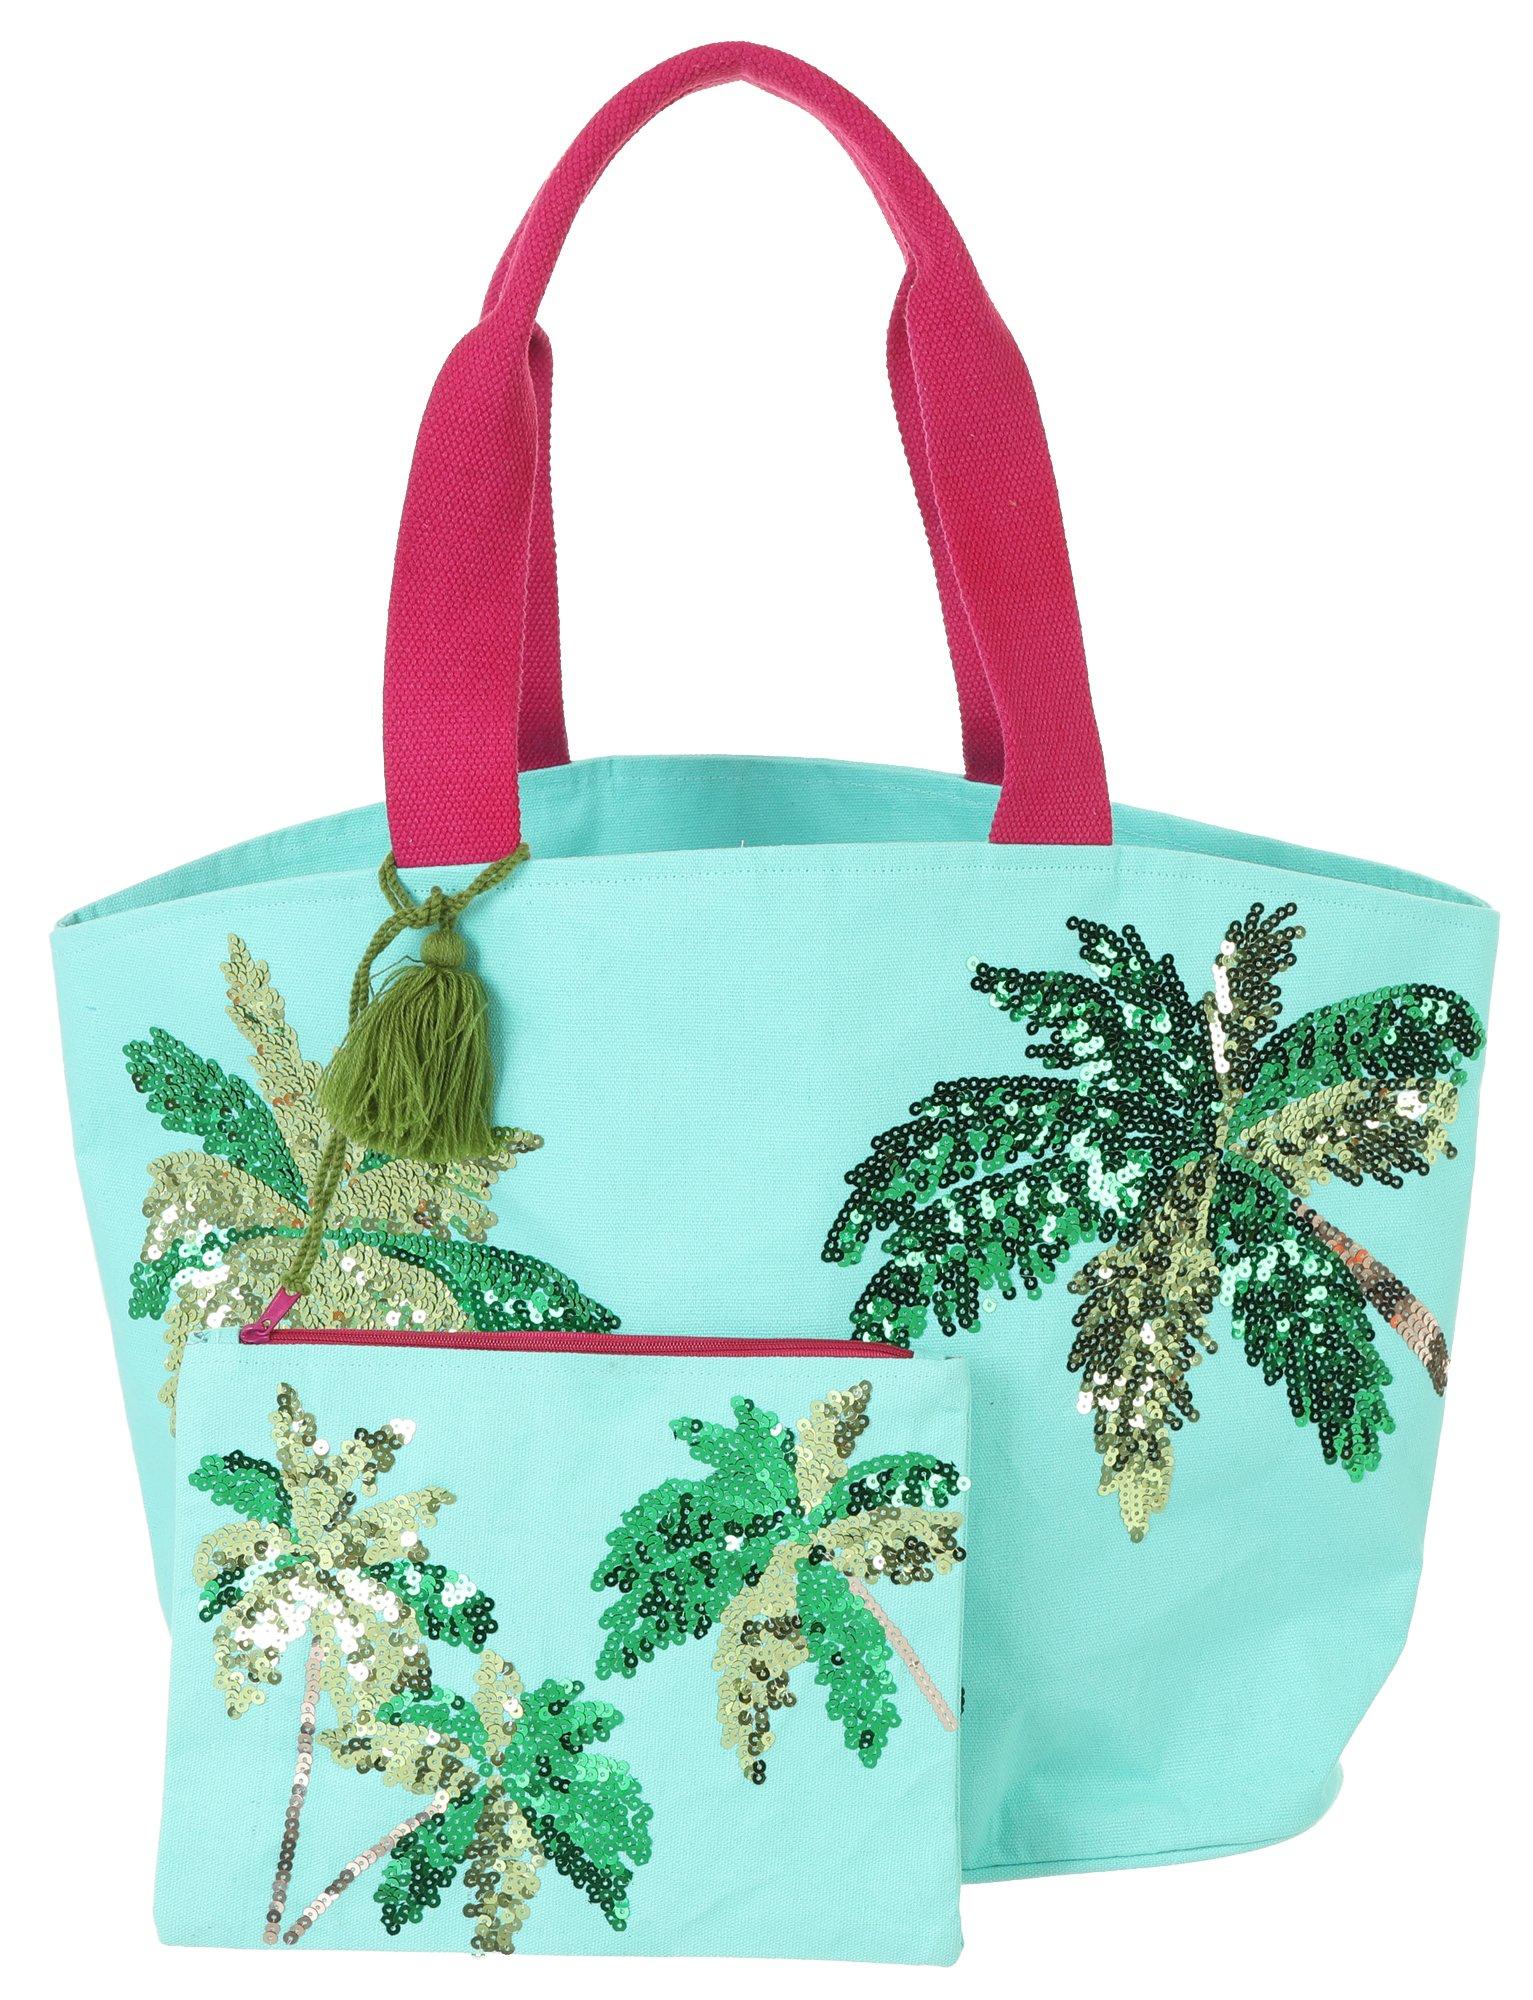 Mina Victory Palm Tree Sequin Beach Tote & Matching Clutch